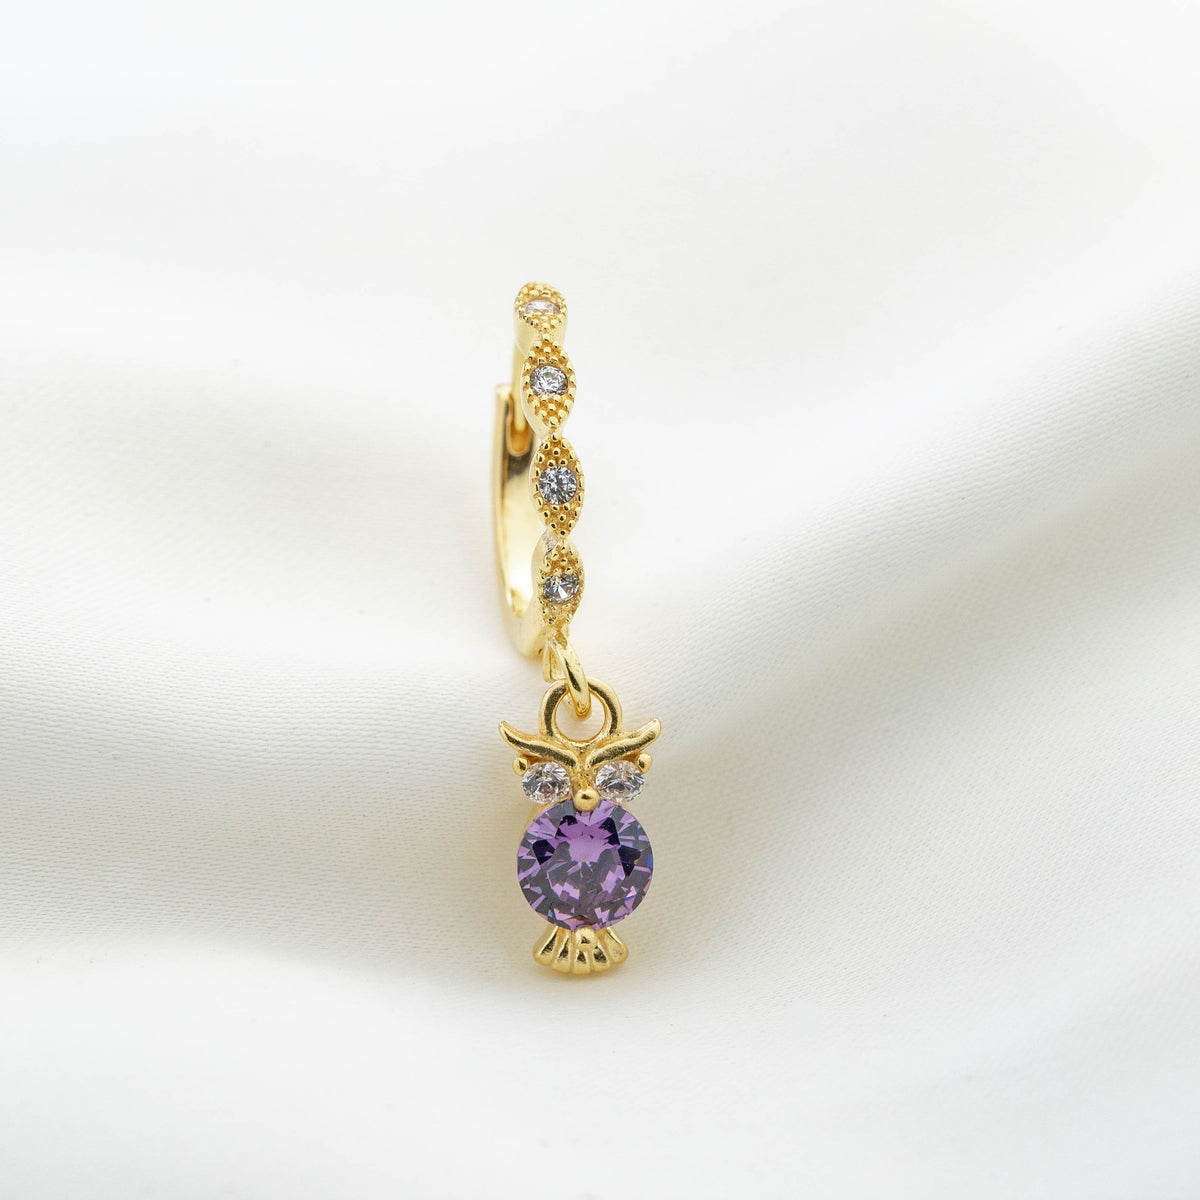 Small Violet Owl Earring